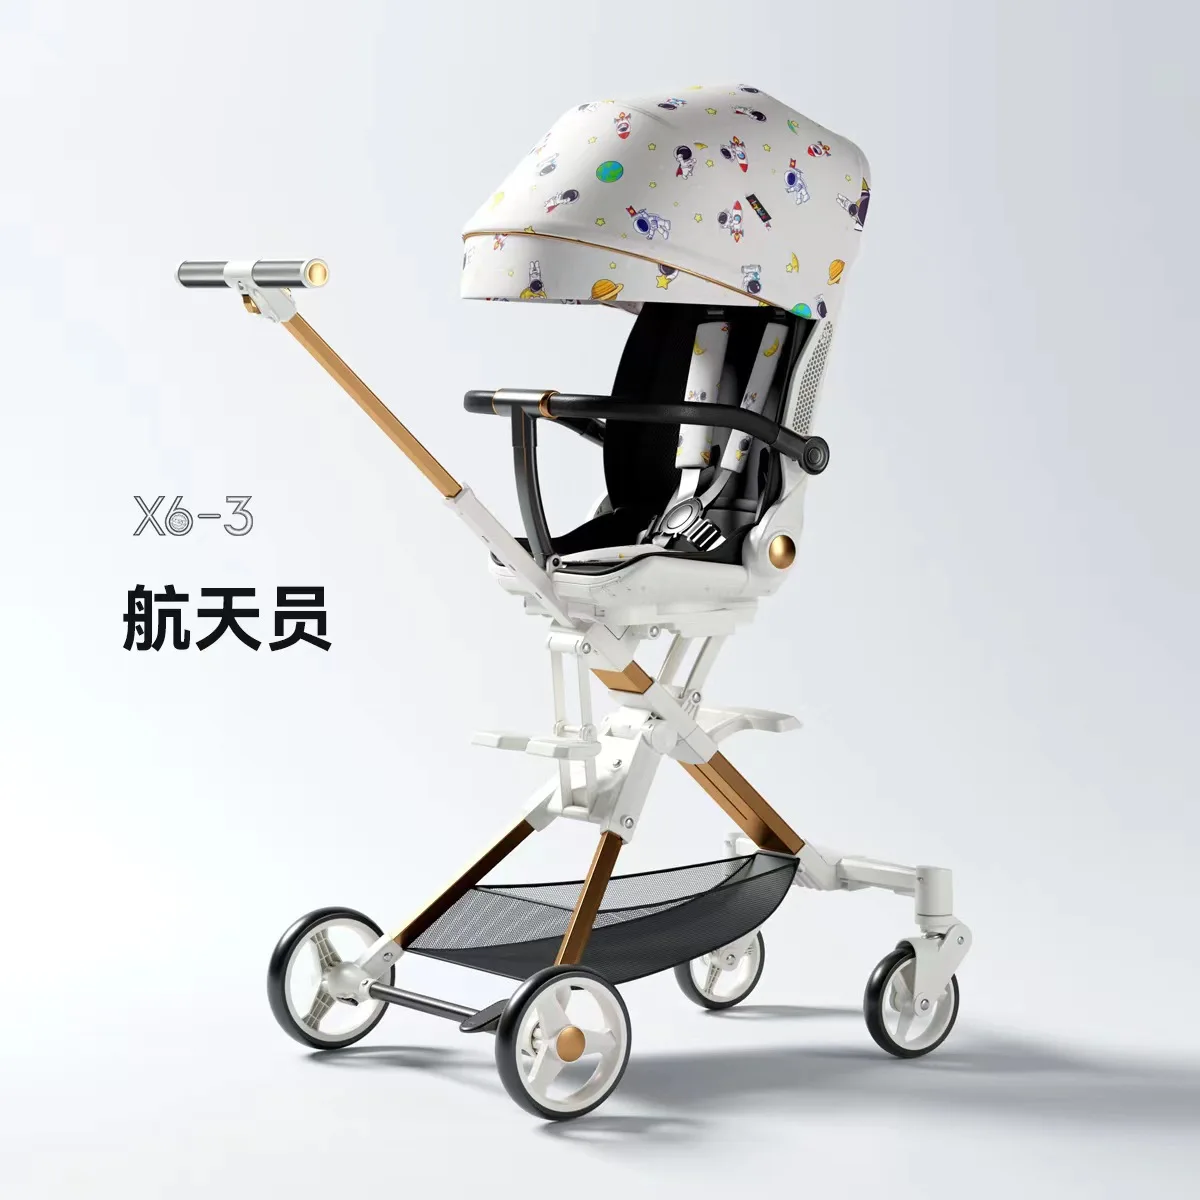 Walking Baby Artifact Can Sit and Lie Light Folding Baby Stroller High Landscape Can Be Reversible Baby Trolley on The Plane